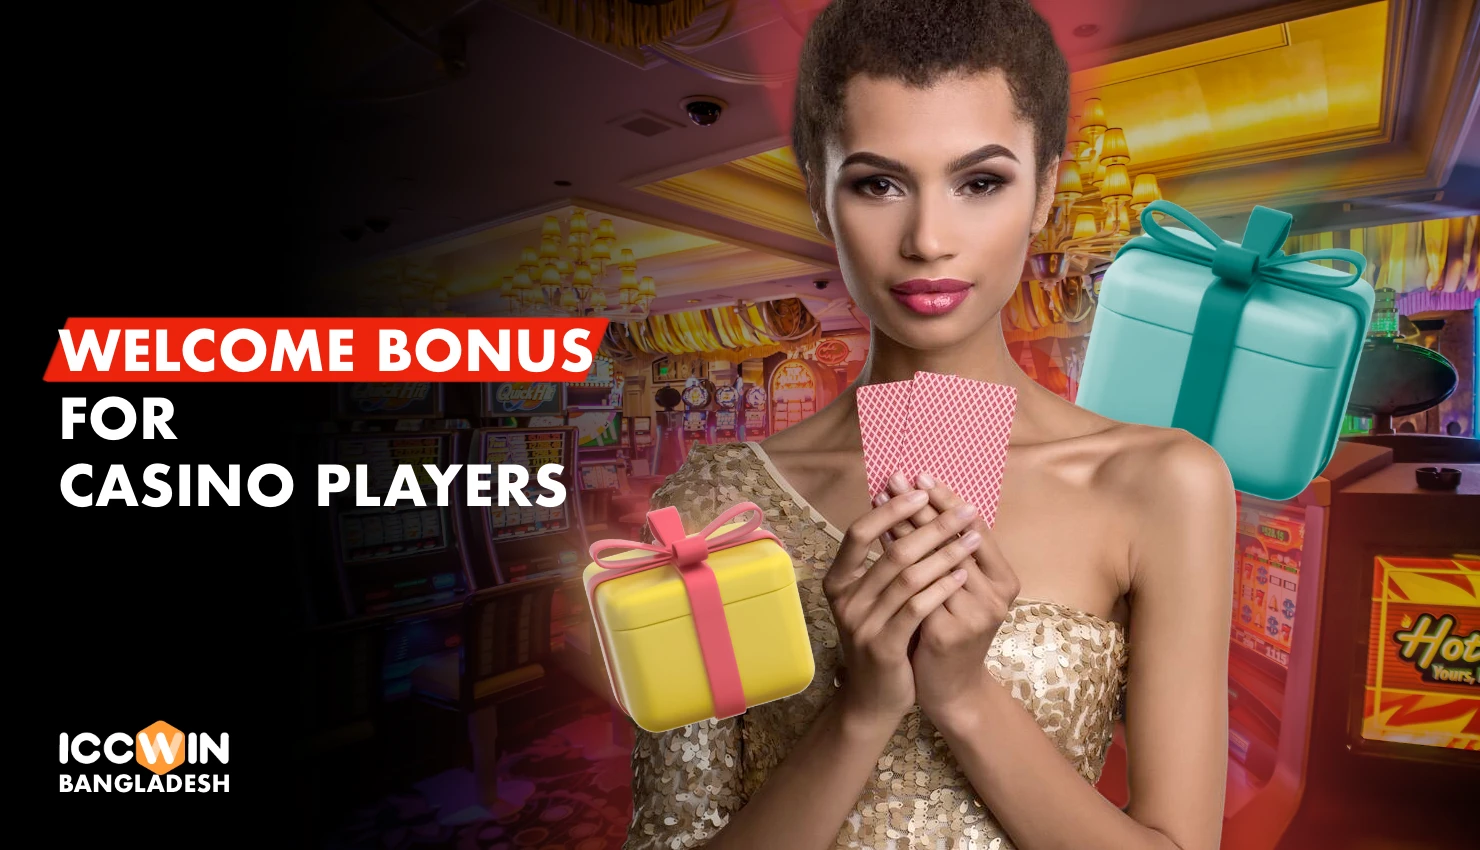 Iccwin casino welcome bonus available to all new customers from Bangladesh